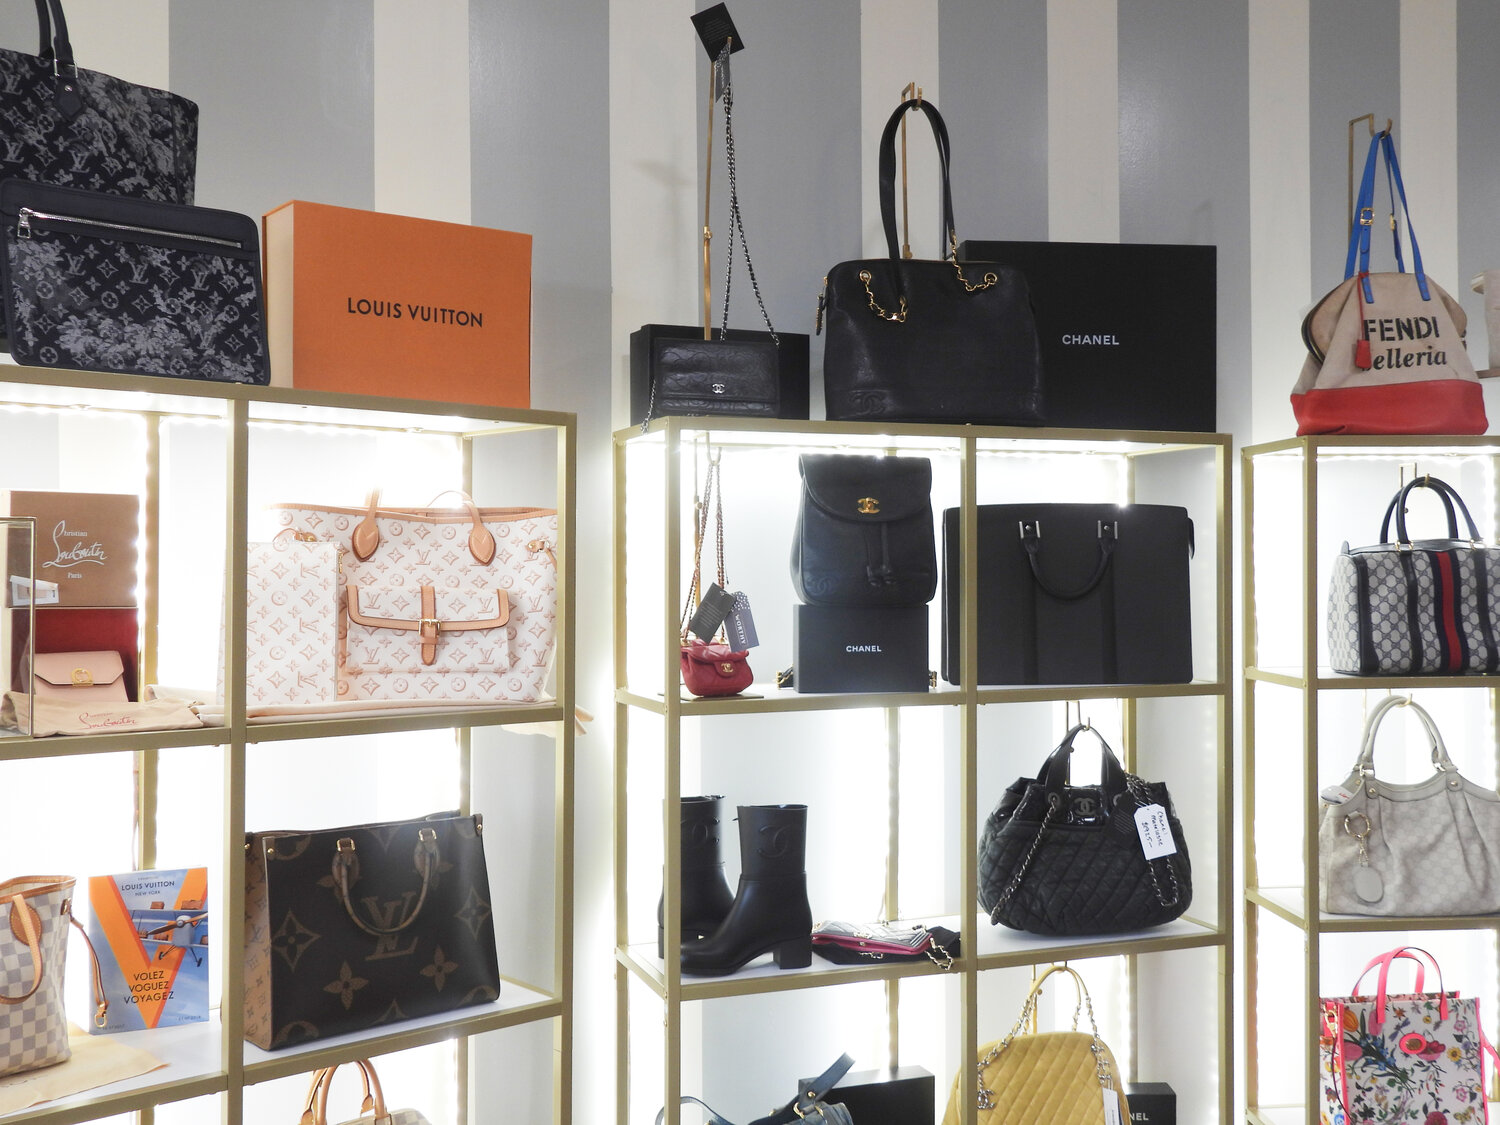 Worthy is a premium and designer resale boutique that offers women's clothing, jewelry, and accessories of all kinds.